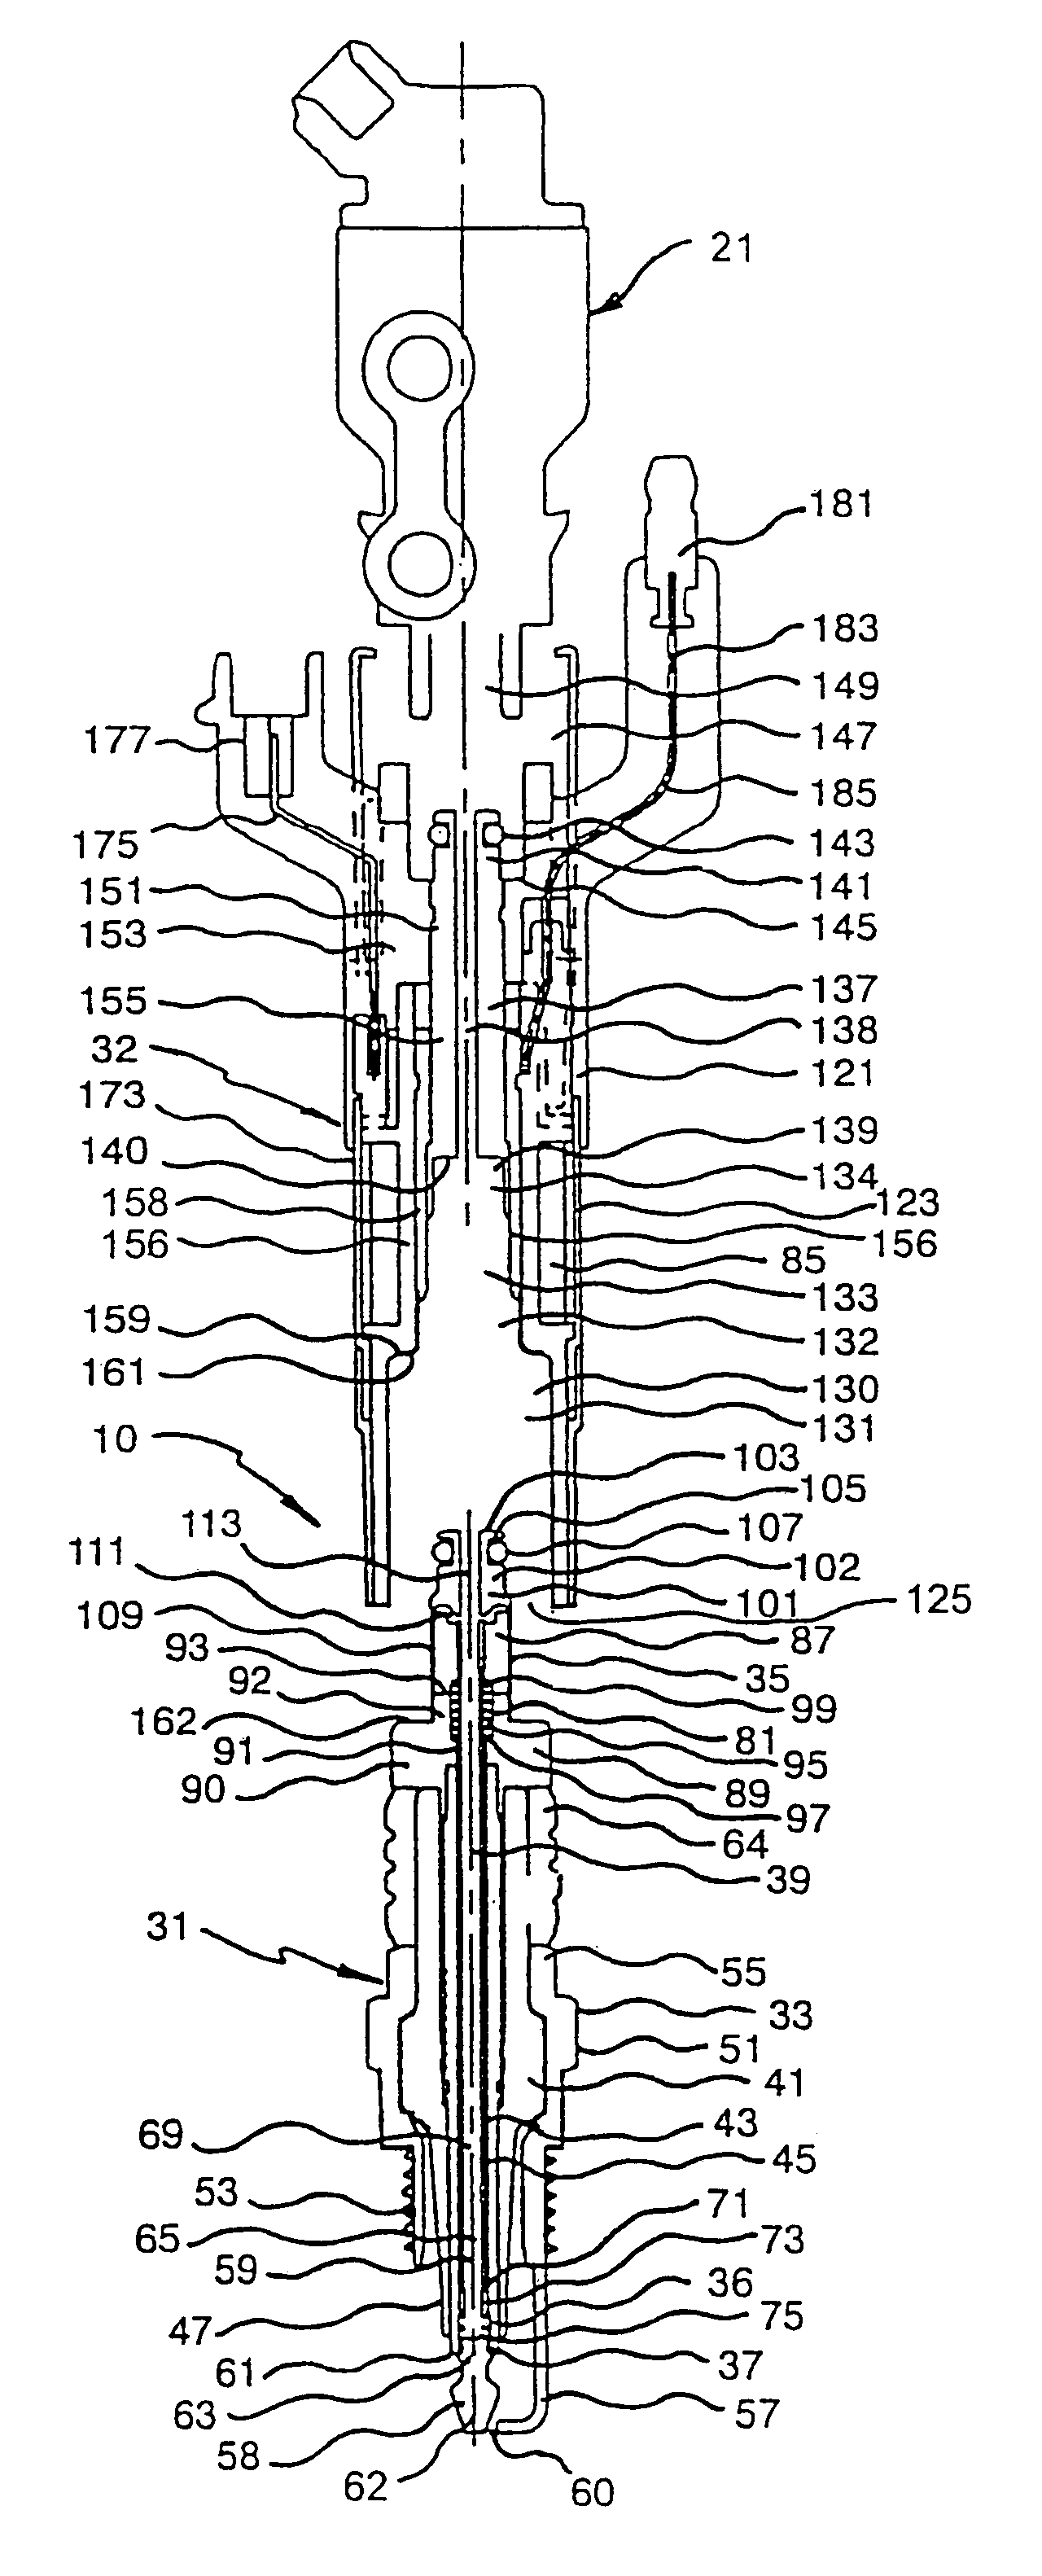 Direct injection of fuels in internal combustion engines